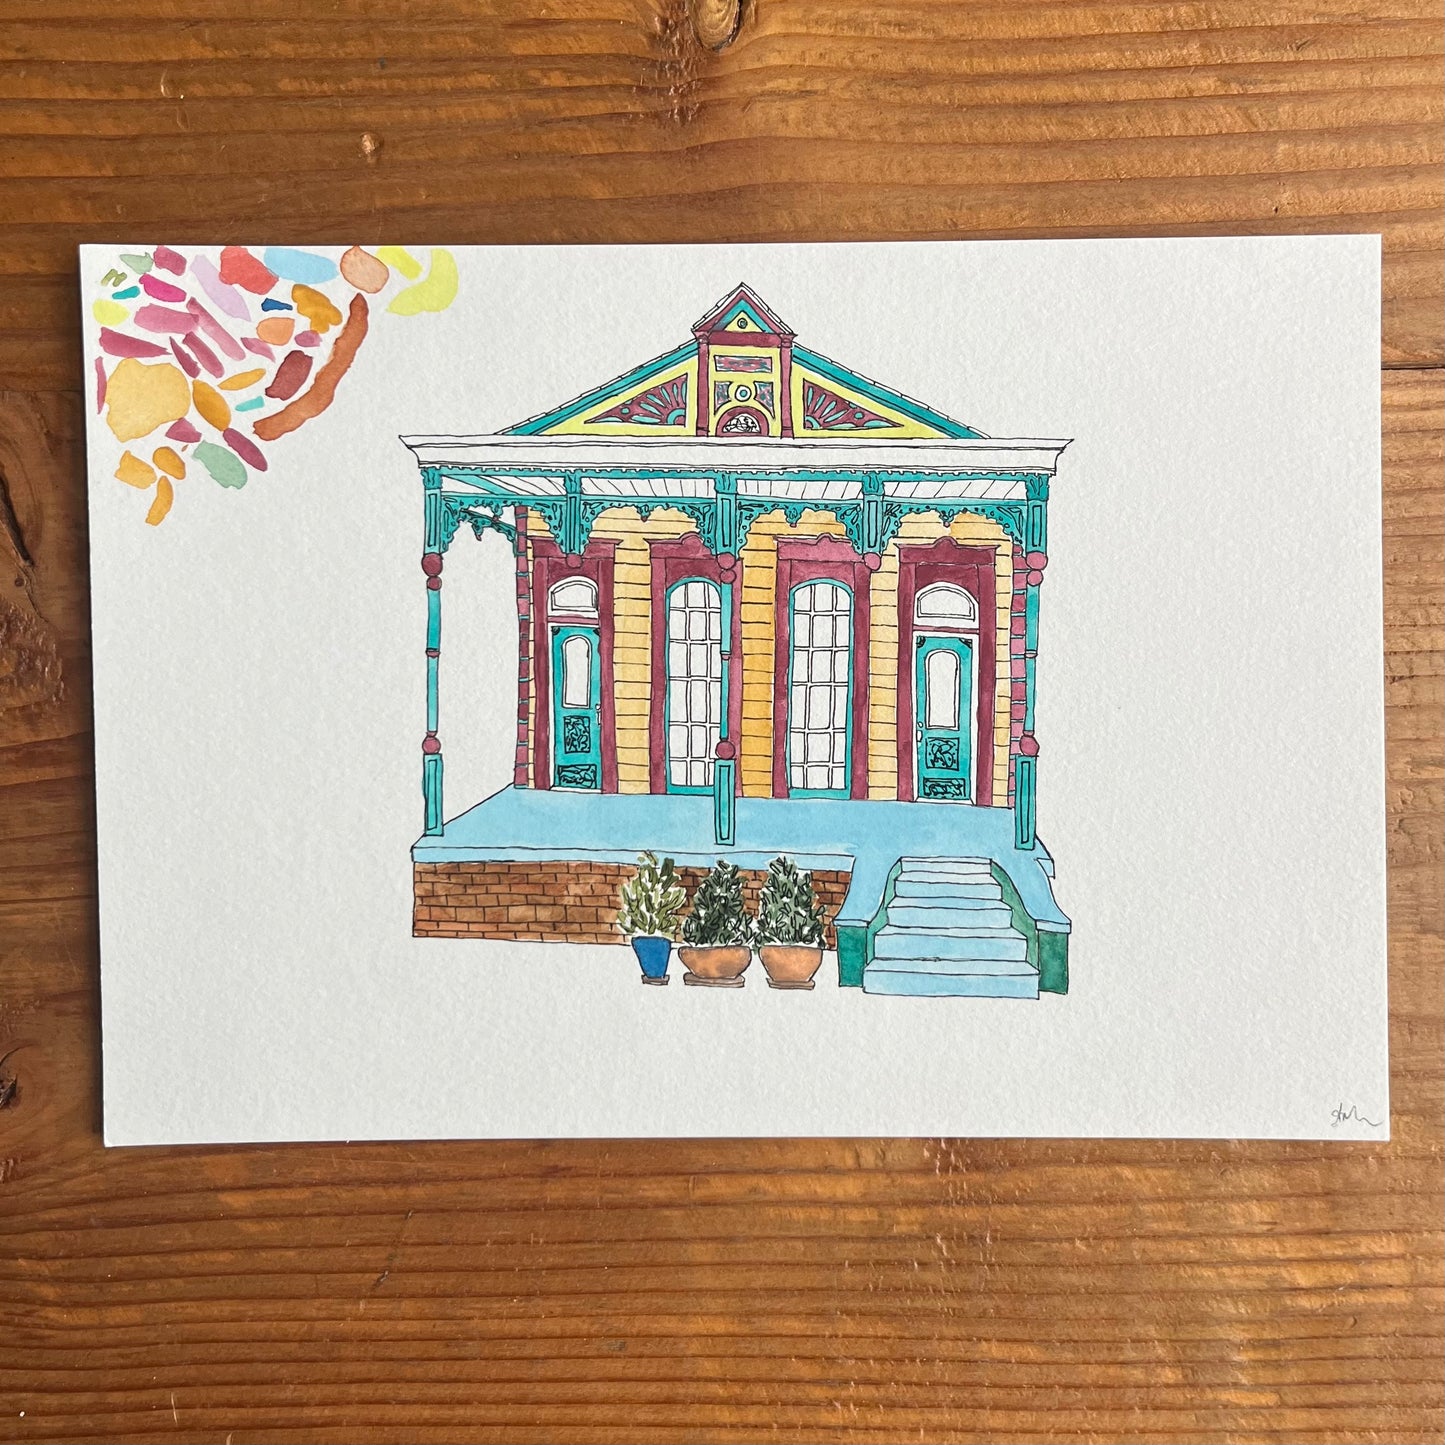 New Orleans House - turquoise, red, yellow (Original)